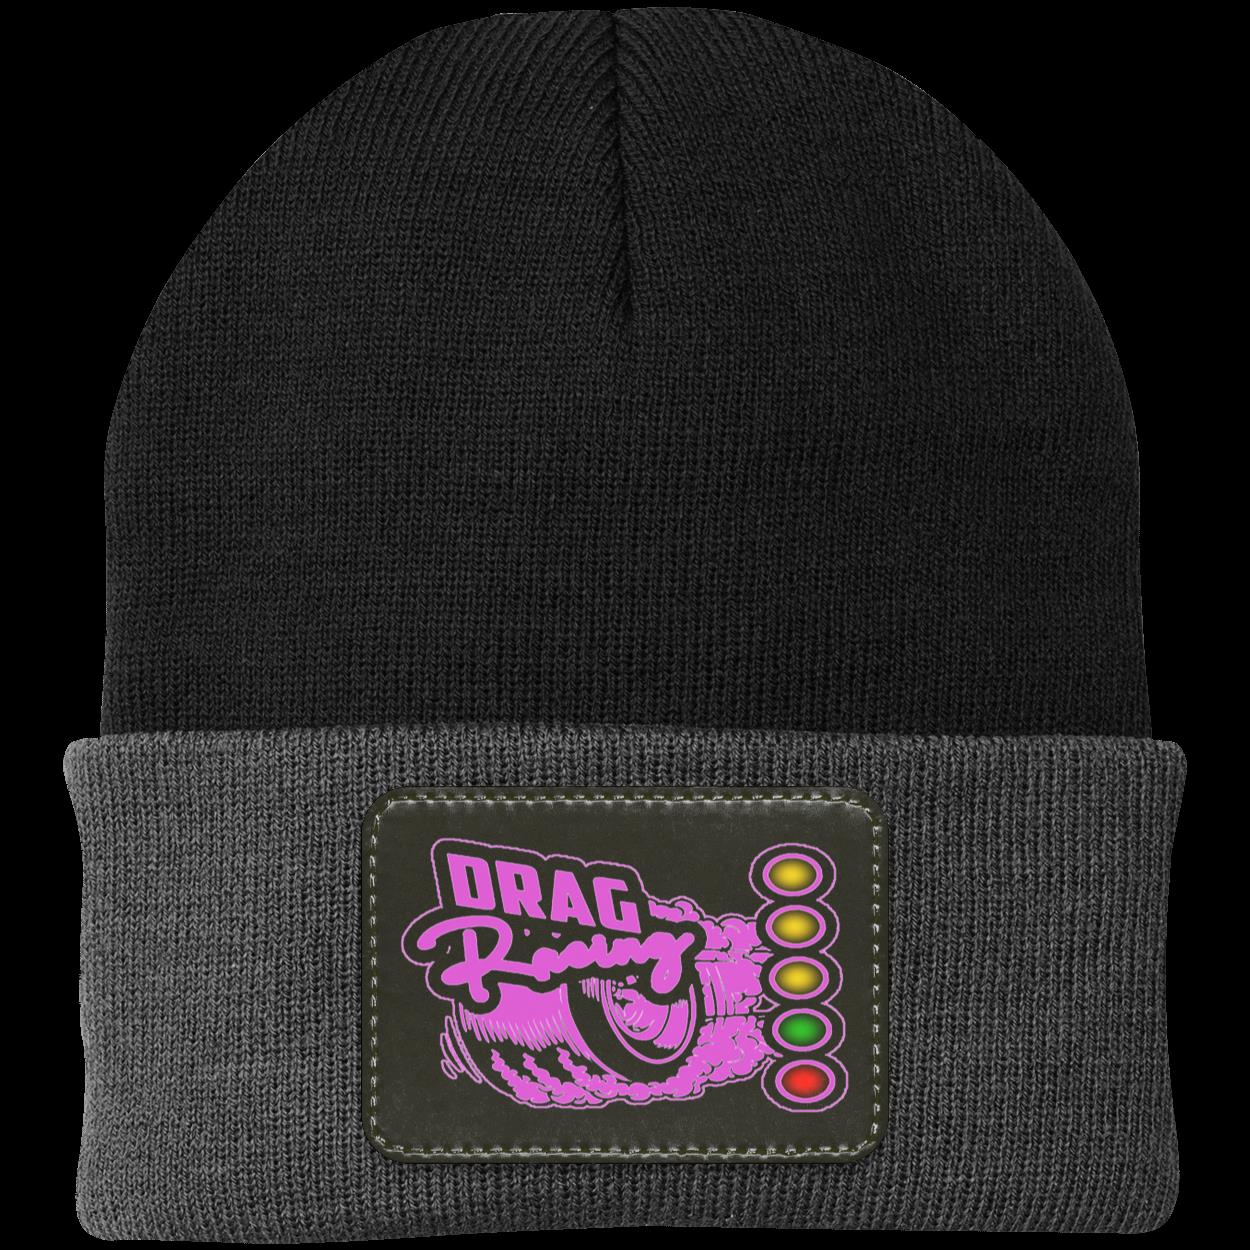 Drag Racing Patched Knit Cap V5